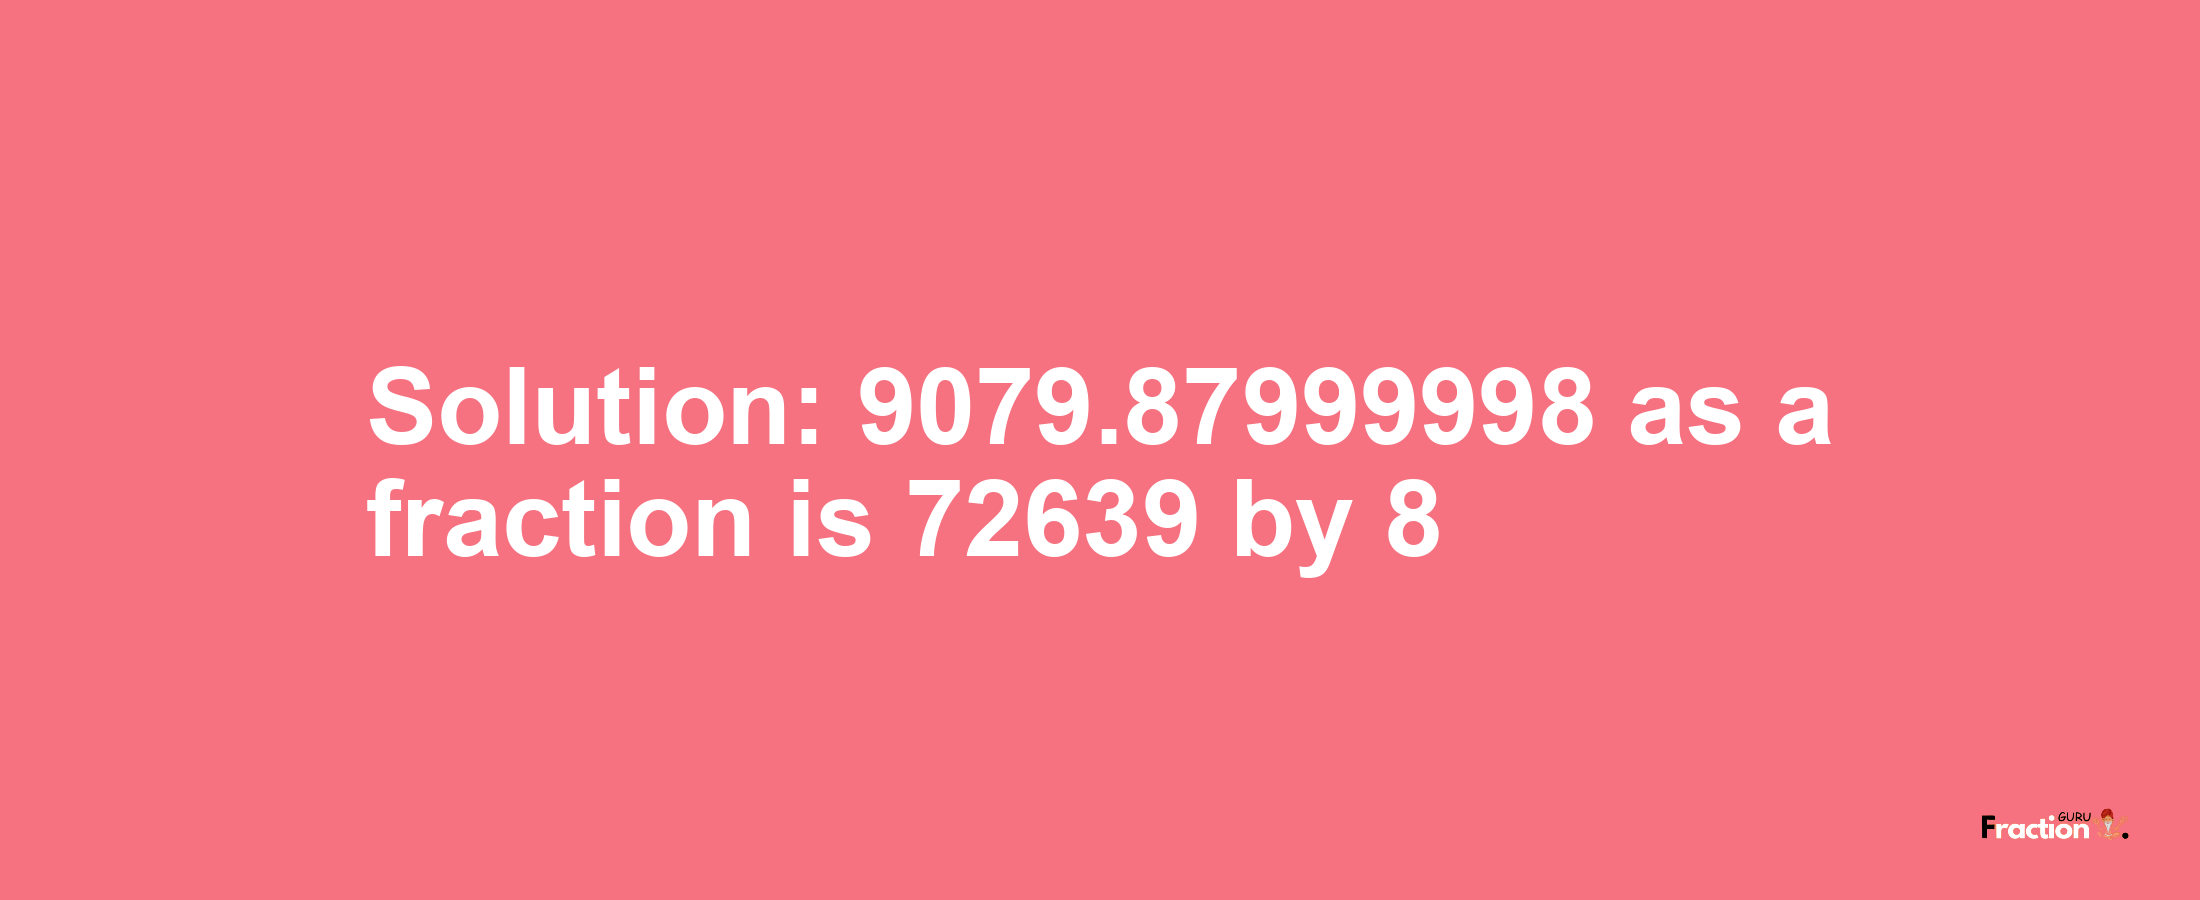 Solution:9079.87999998 as a fraction is 72639/8